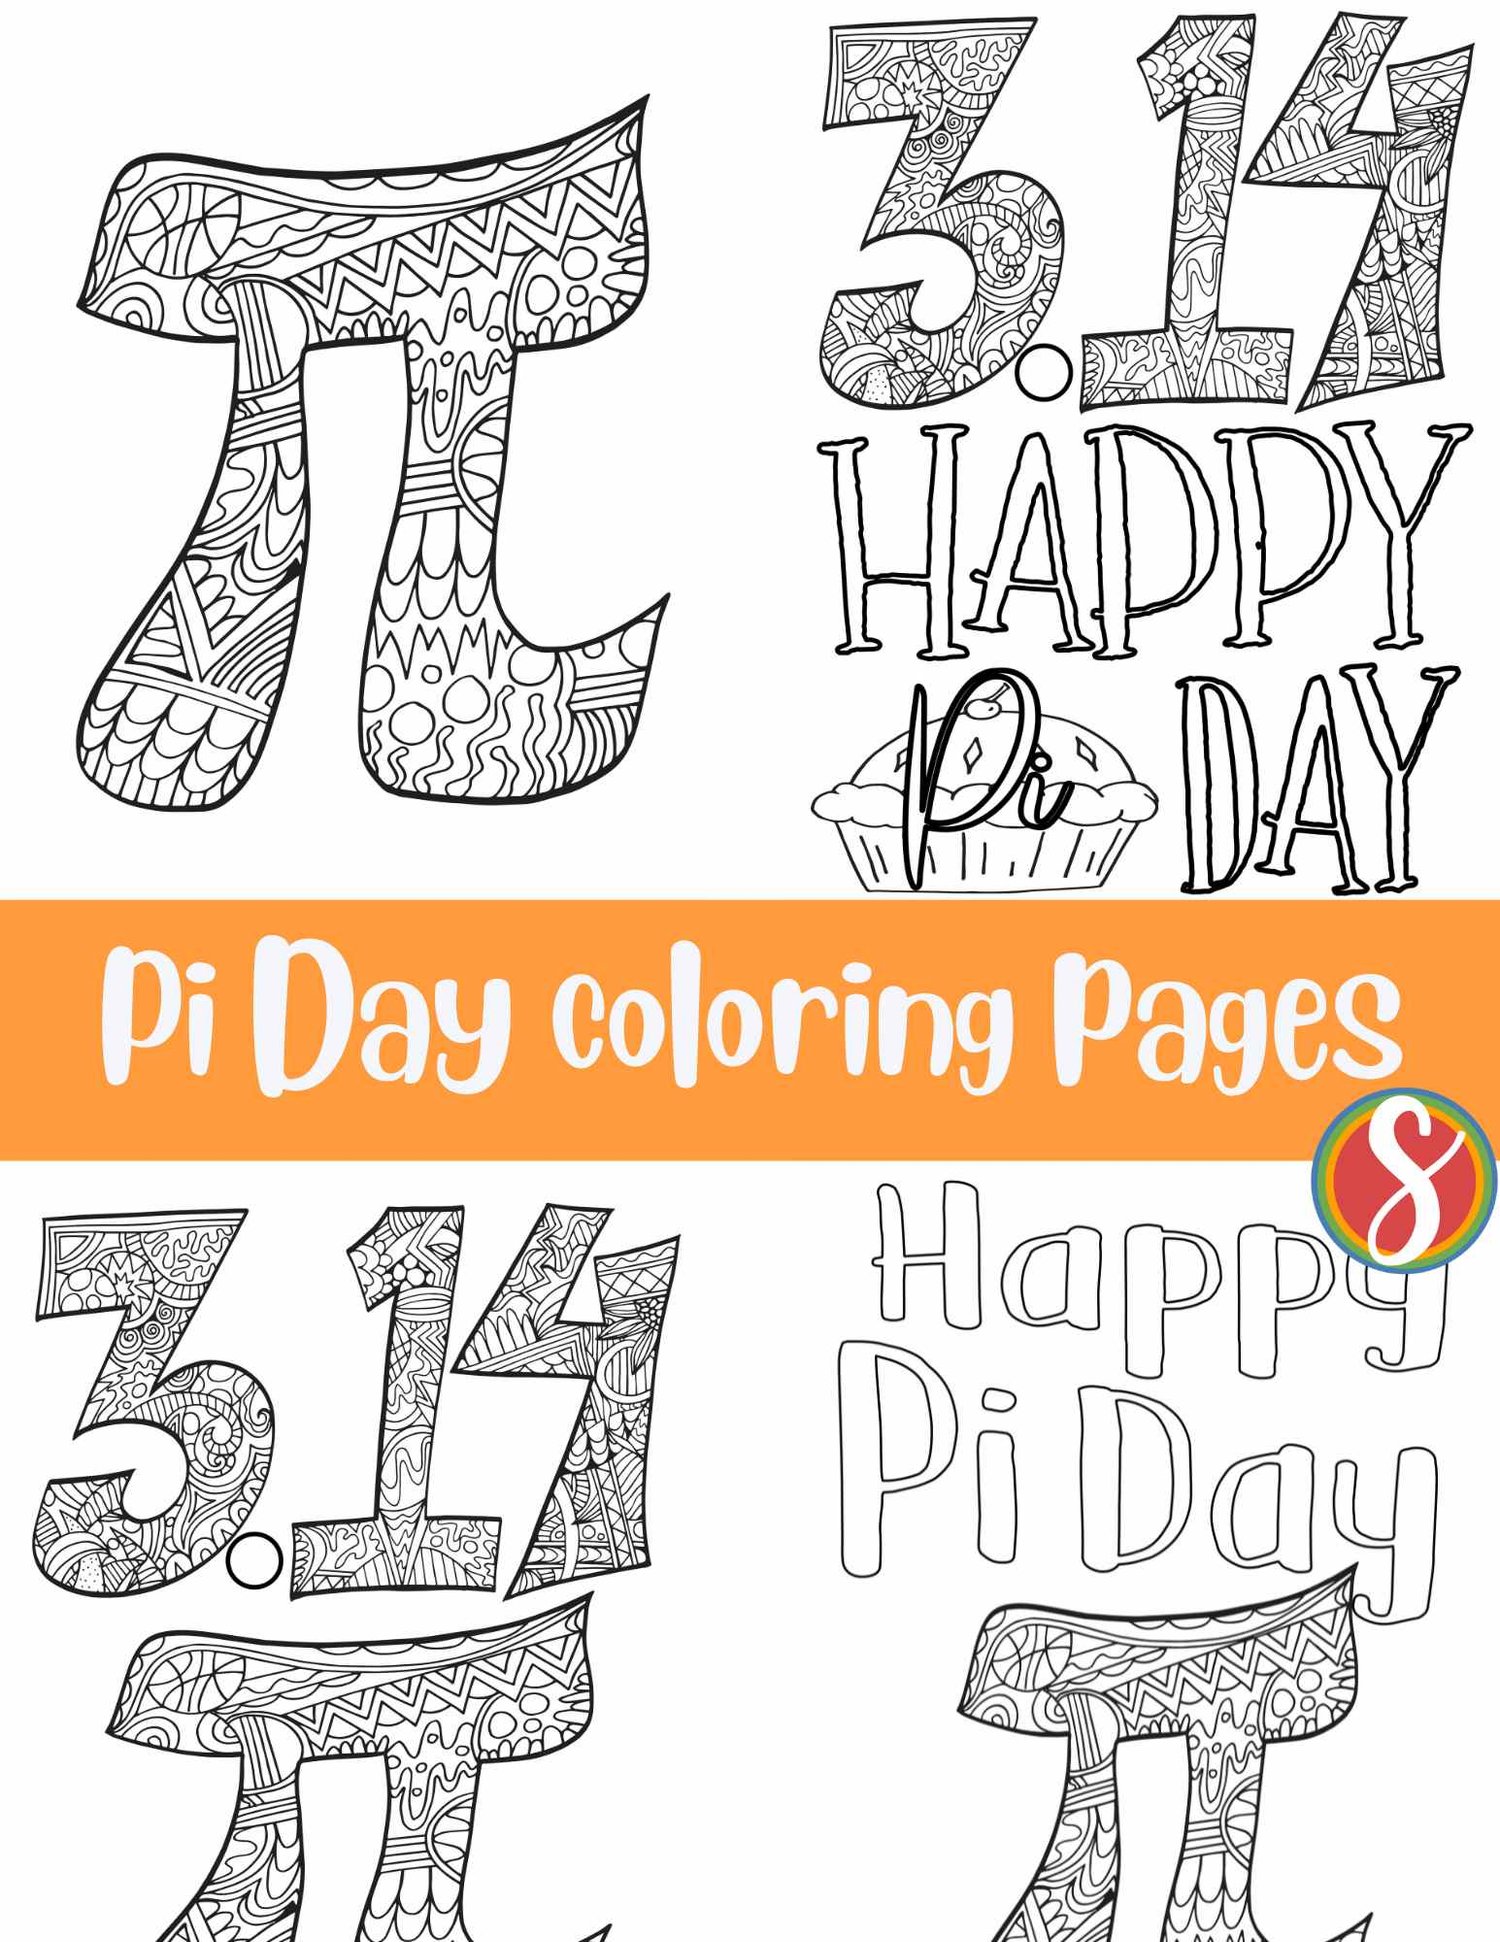 Free pi day coloring pages â stevie doodles